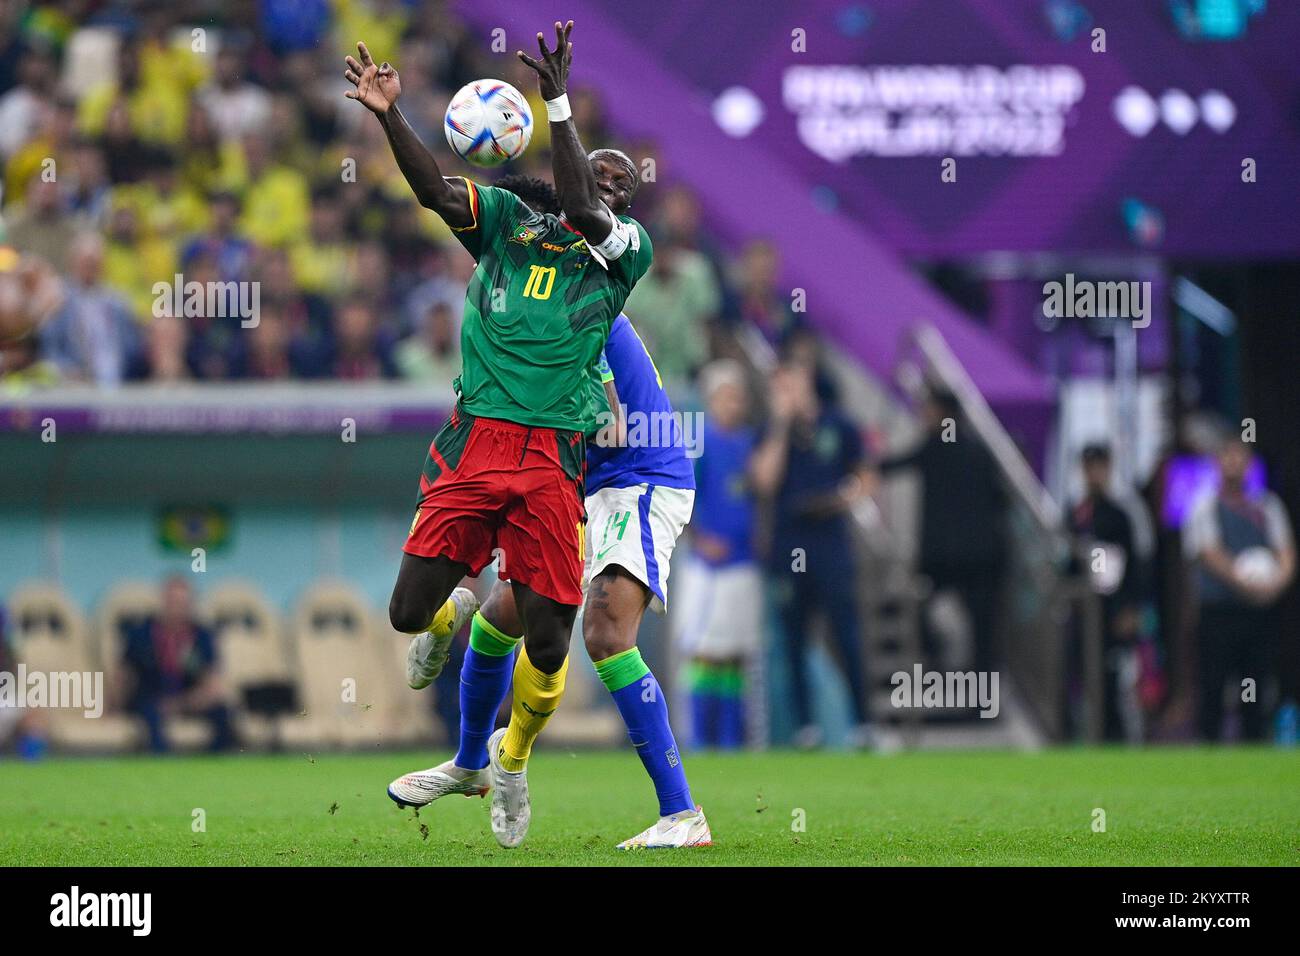 LUSAIL CITY, QATAR - DECEMBER 2: Vincent Aboubakar of Cameroon in action during the Group G - FIFA World Cup Qatar 2022 match between Cameroon and Brazil at the Lusail Stadium on December 2, 2022 in Lusail City, Qatar (Photo by Pablo Morano/BSR Agency) Stock Photo